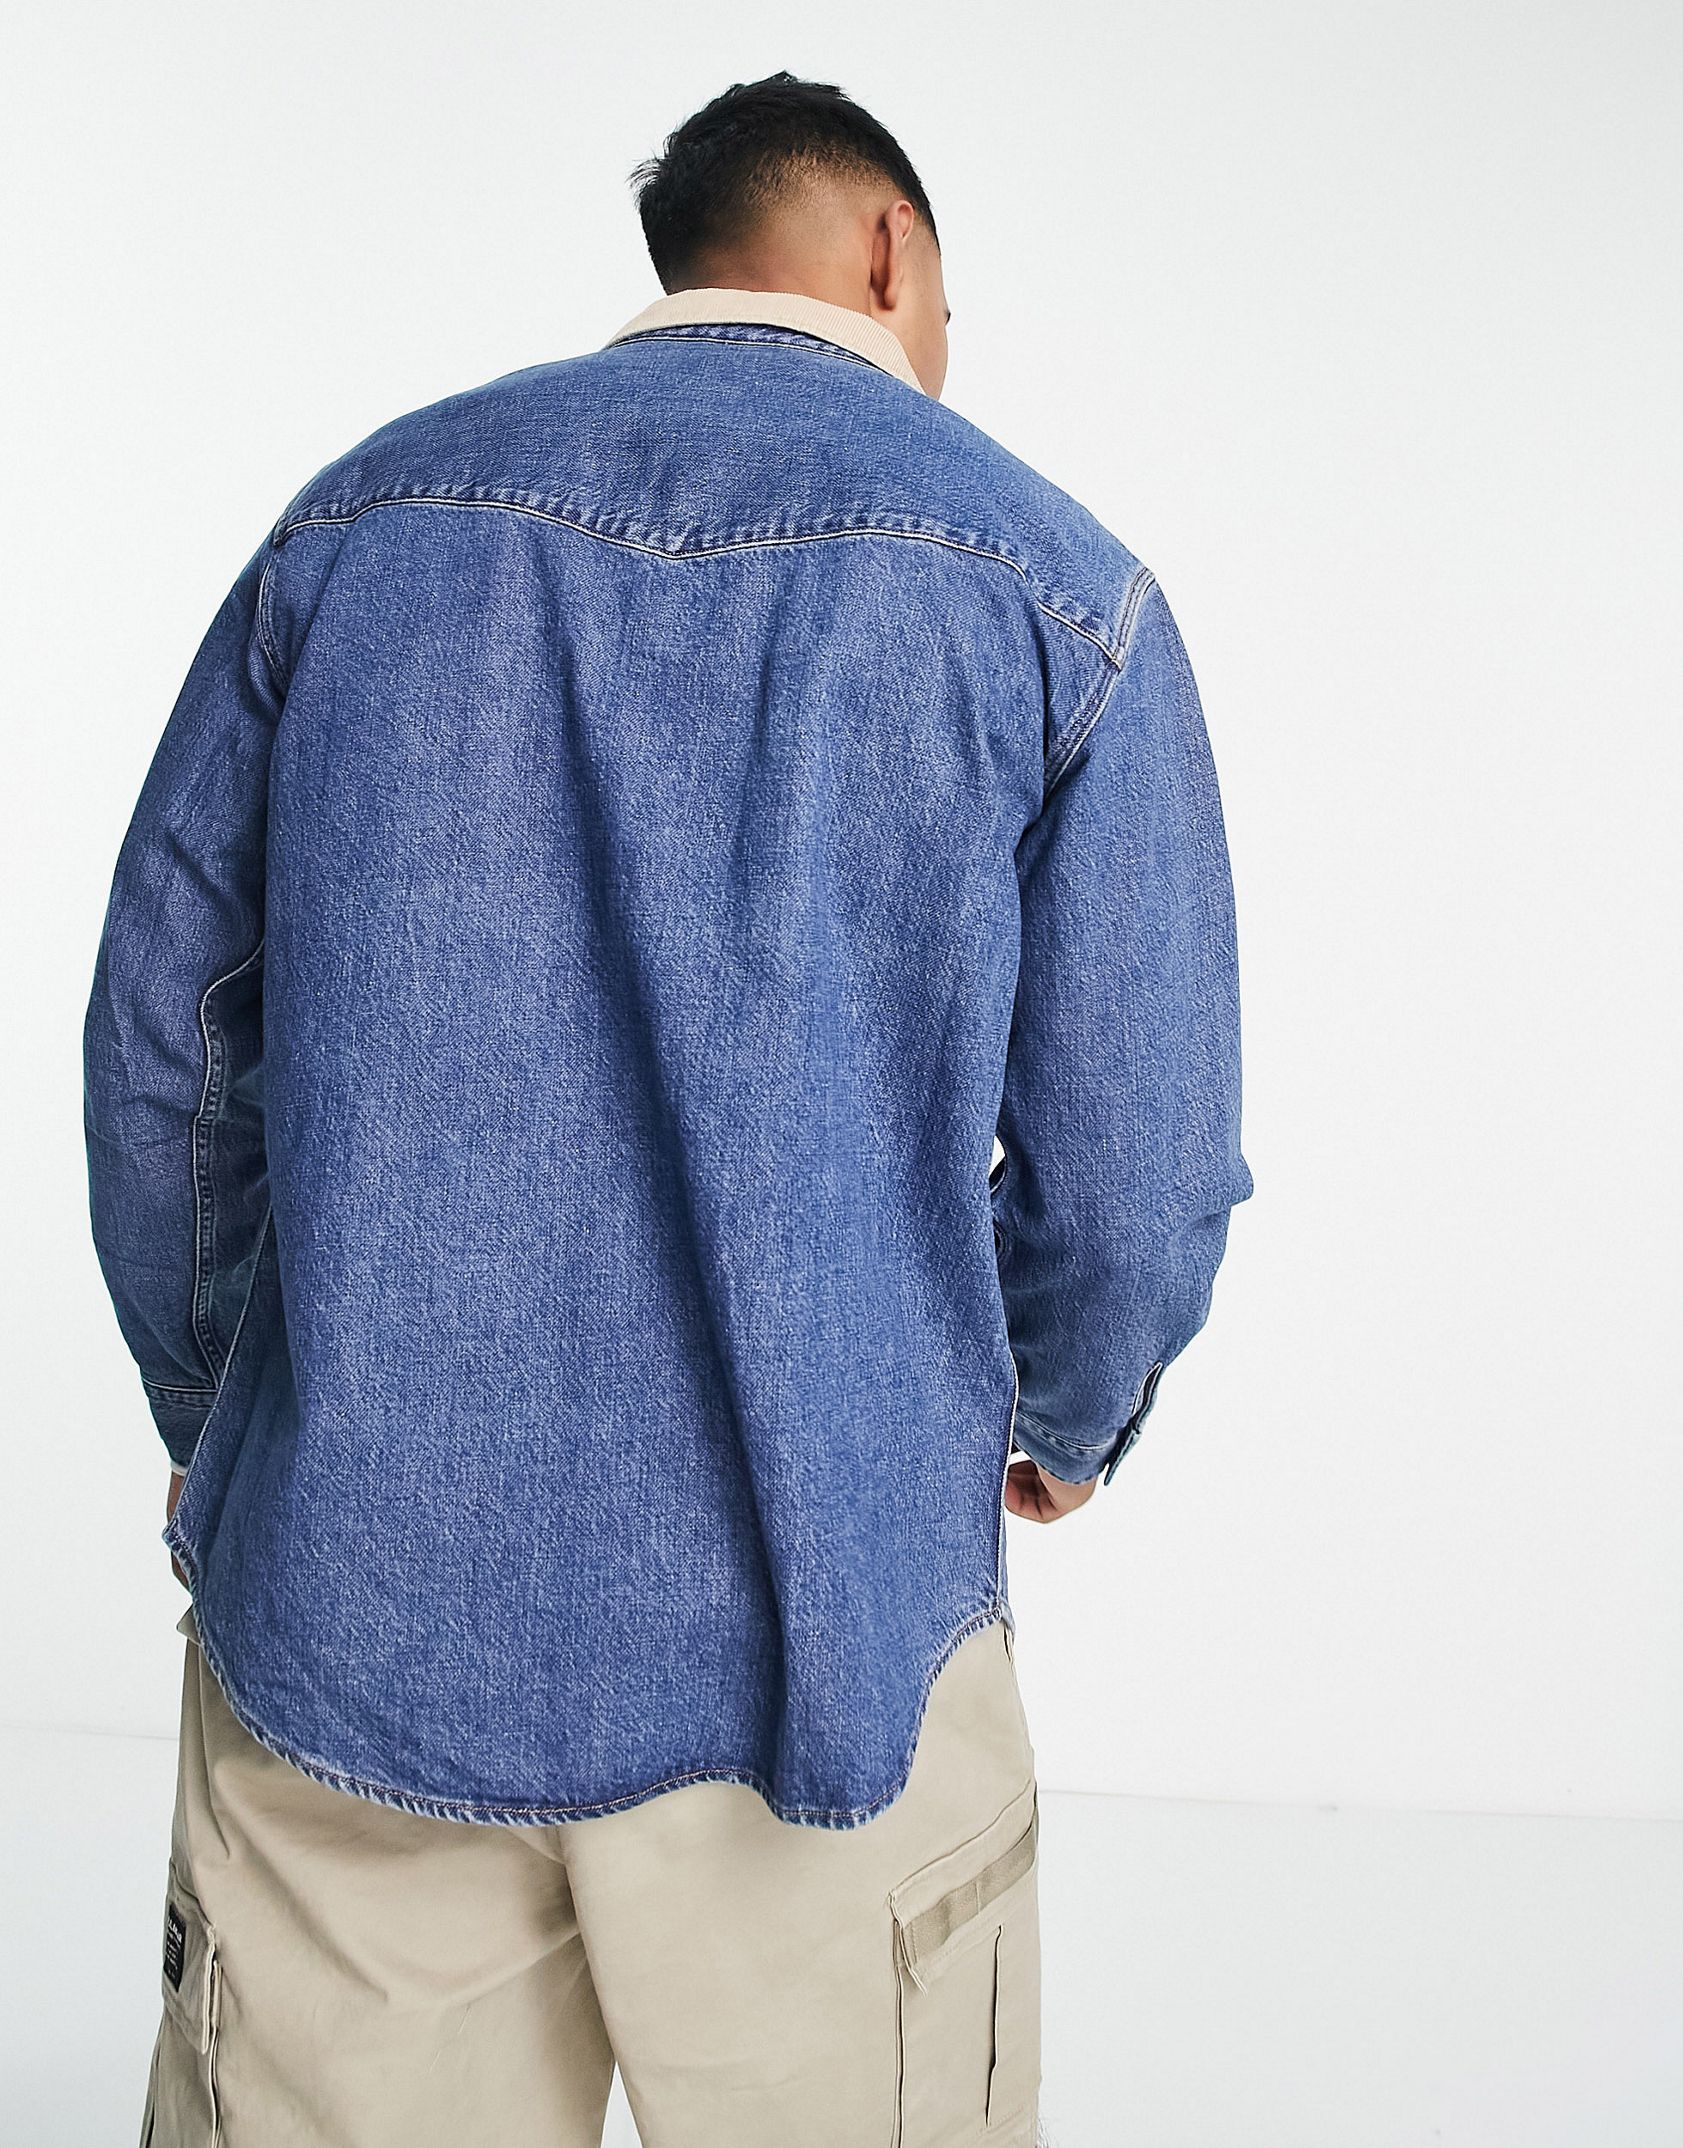 Levi's denim shirt in blue wash with cord collared -  Price Checker